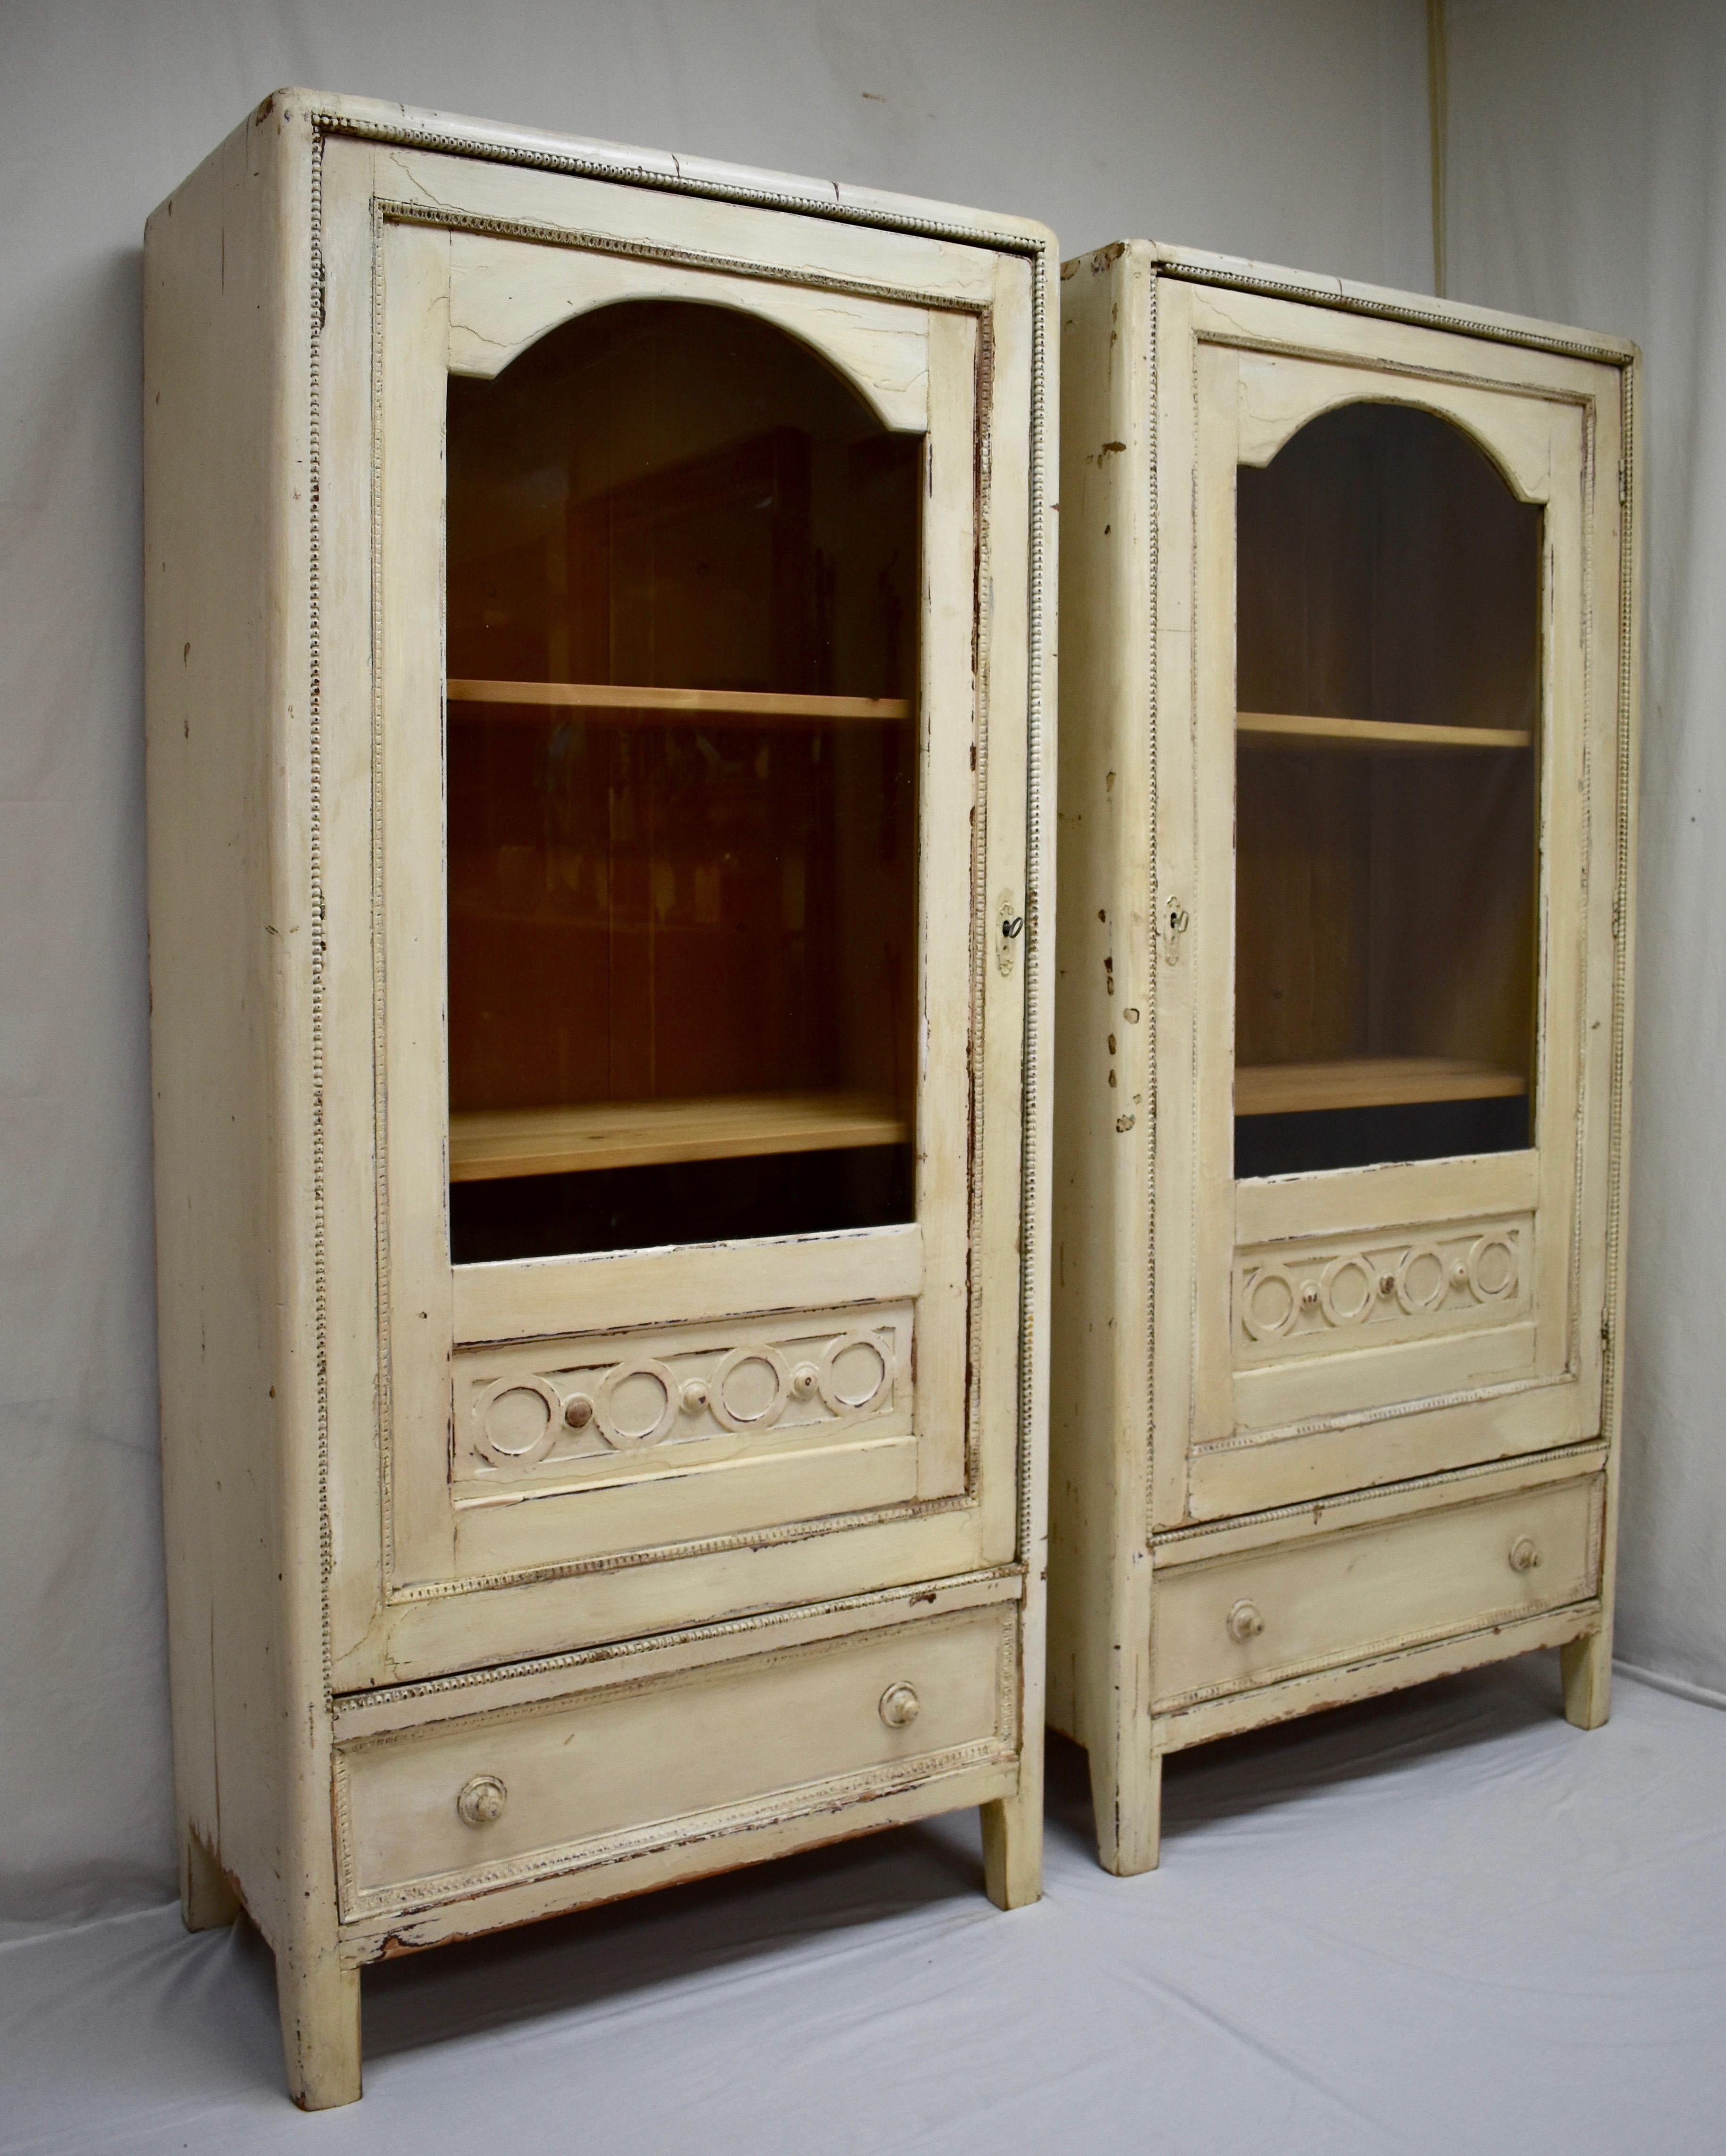 This is a matched pair of truly “shabby chic” glazed cabinets or vitrines with smooth and elegant decorative features. The crown has no molding but is rounded over, exposing hand-cut dovetails where the paint has worn away. The sides extend to the